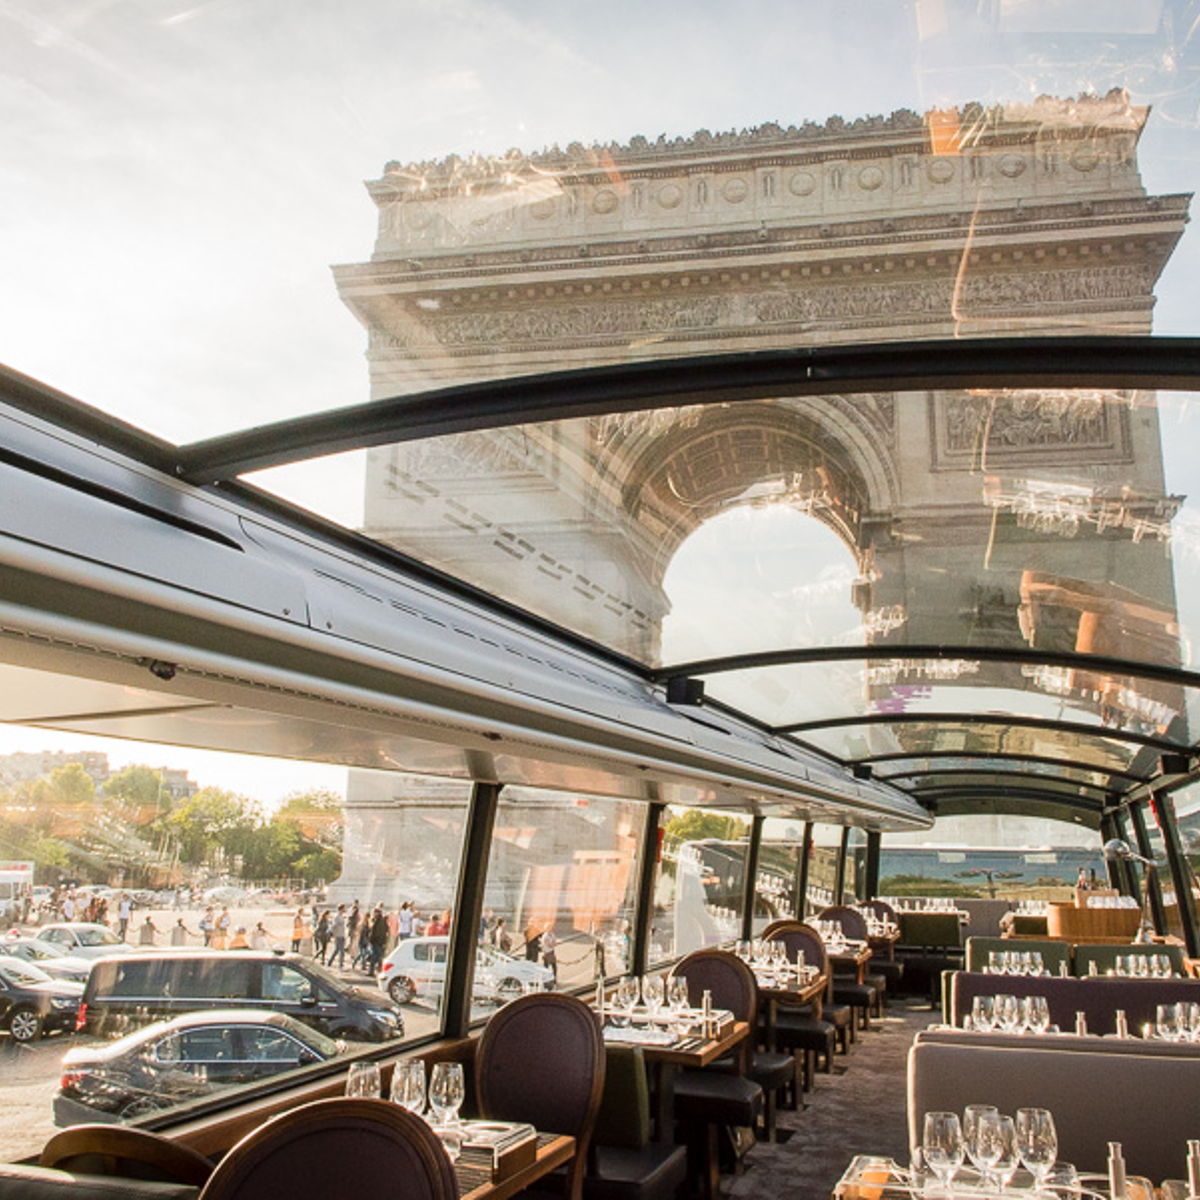 Luxury Paris bus tour with gourmet lunch and panoramic view